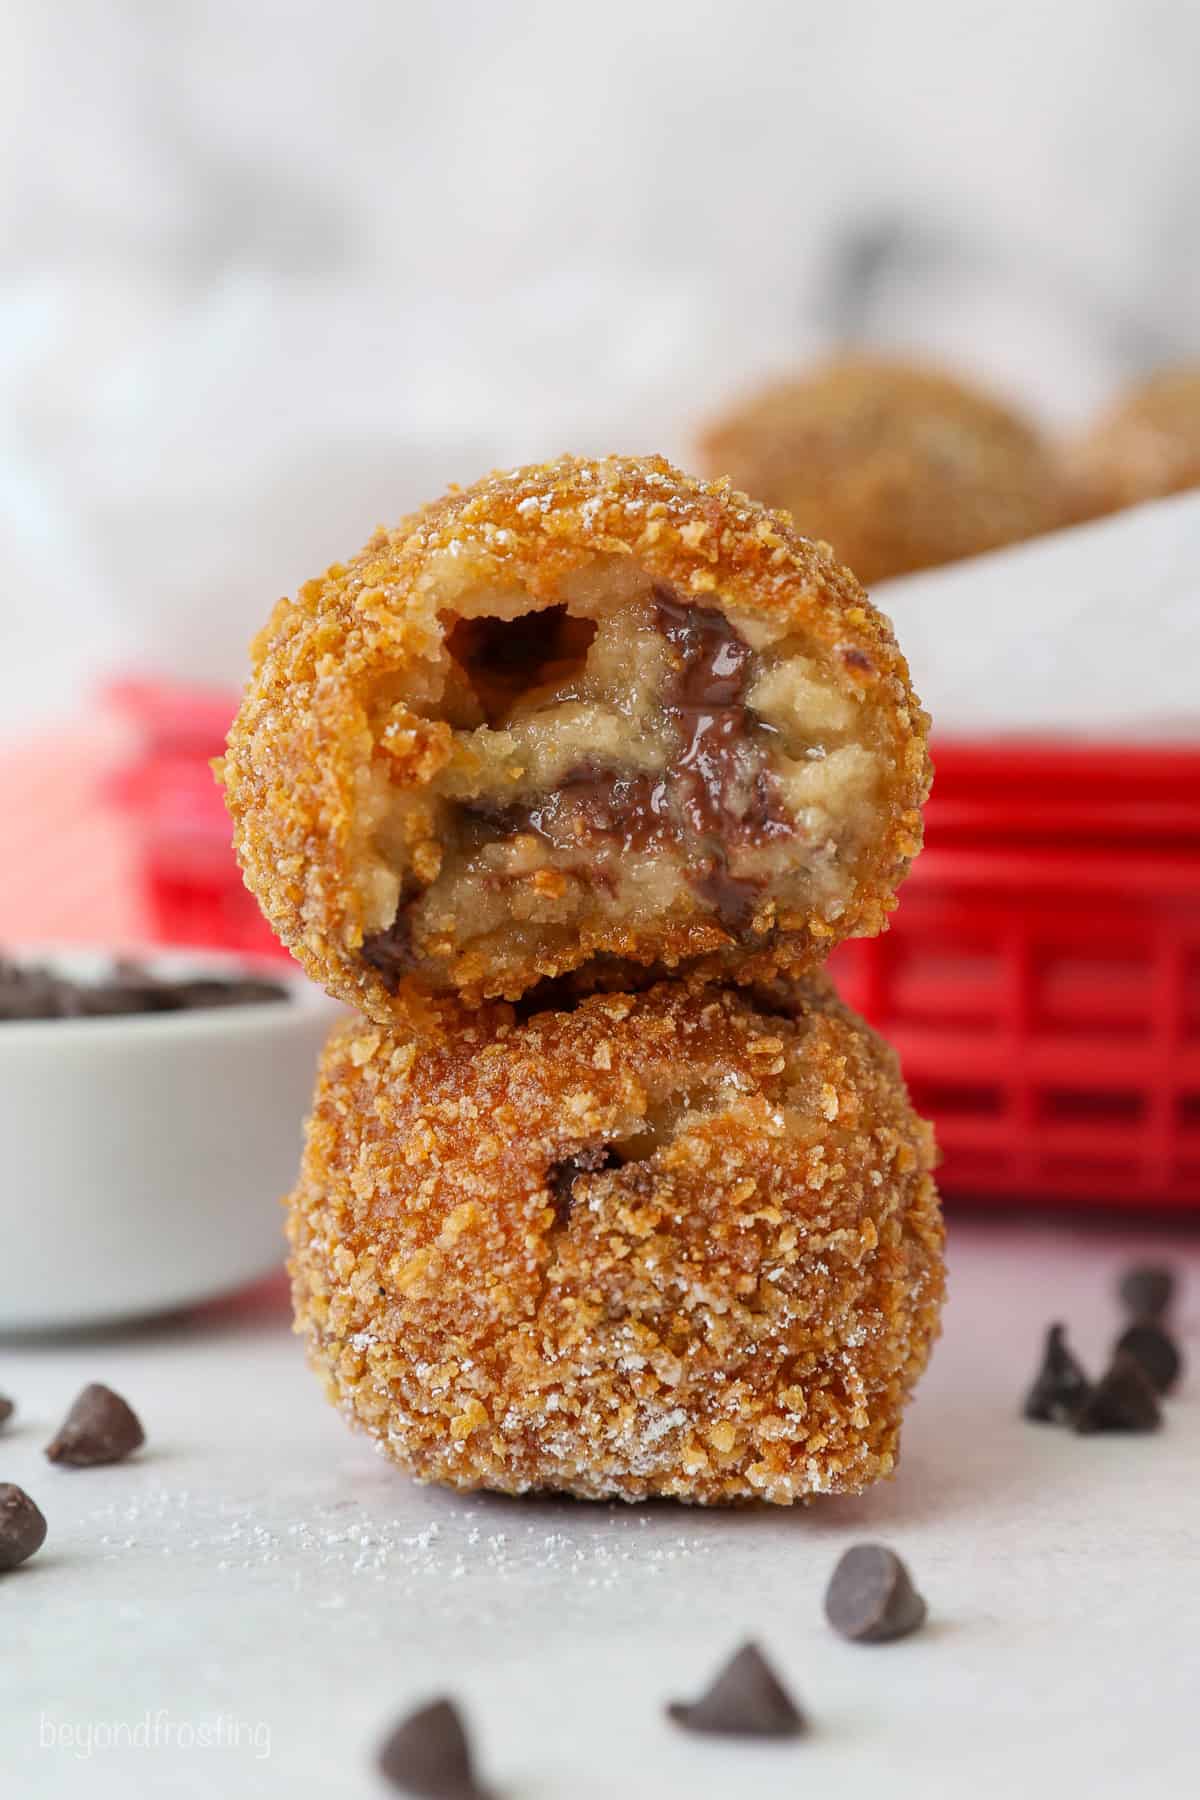 Two deep fried cookie dough balls stacked on top of one another, with a bite missing from the top ball.